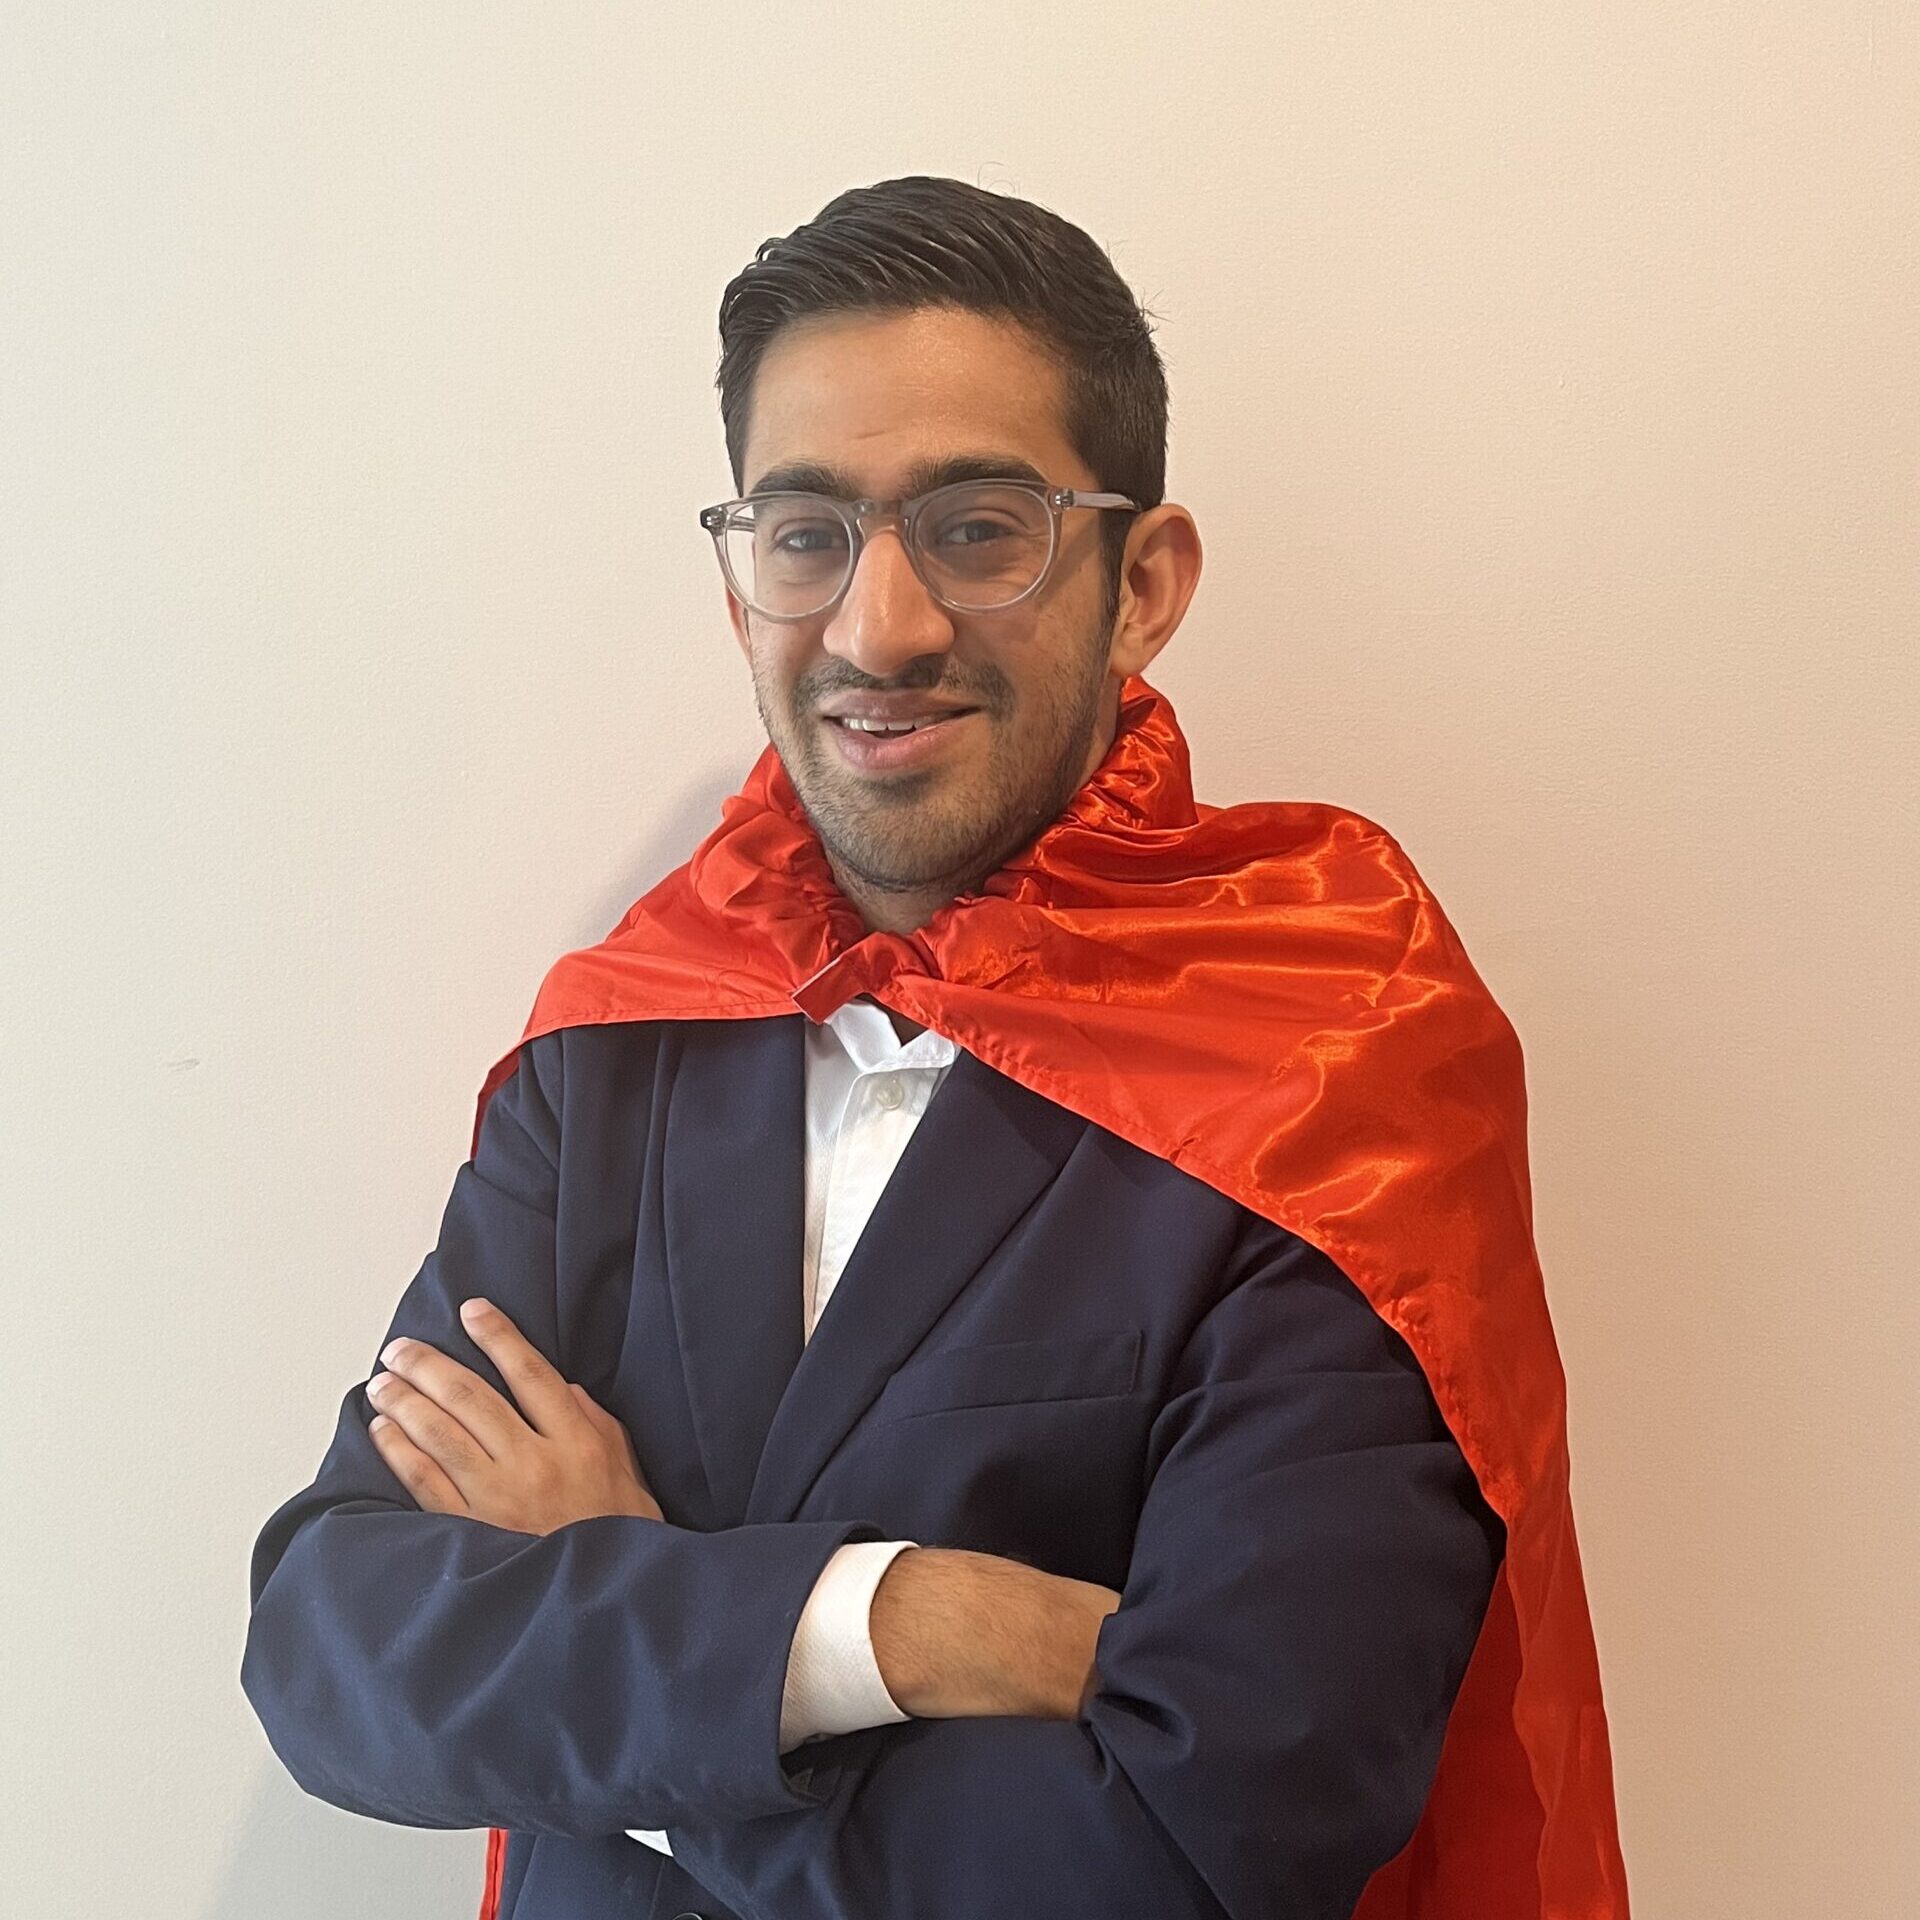 Smiling person with short hair and glasses wearing a red cape and black blazer.